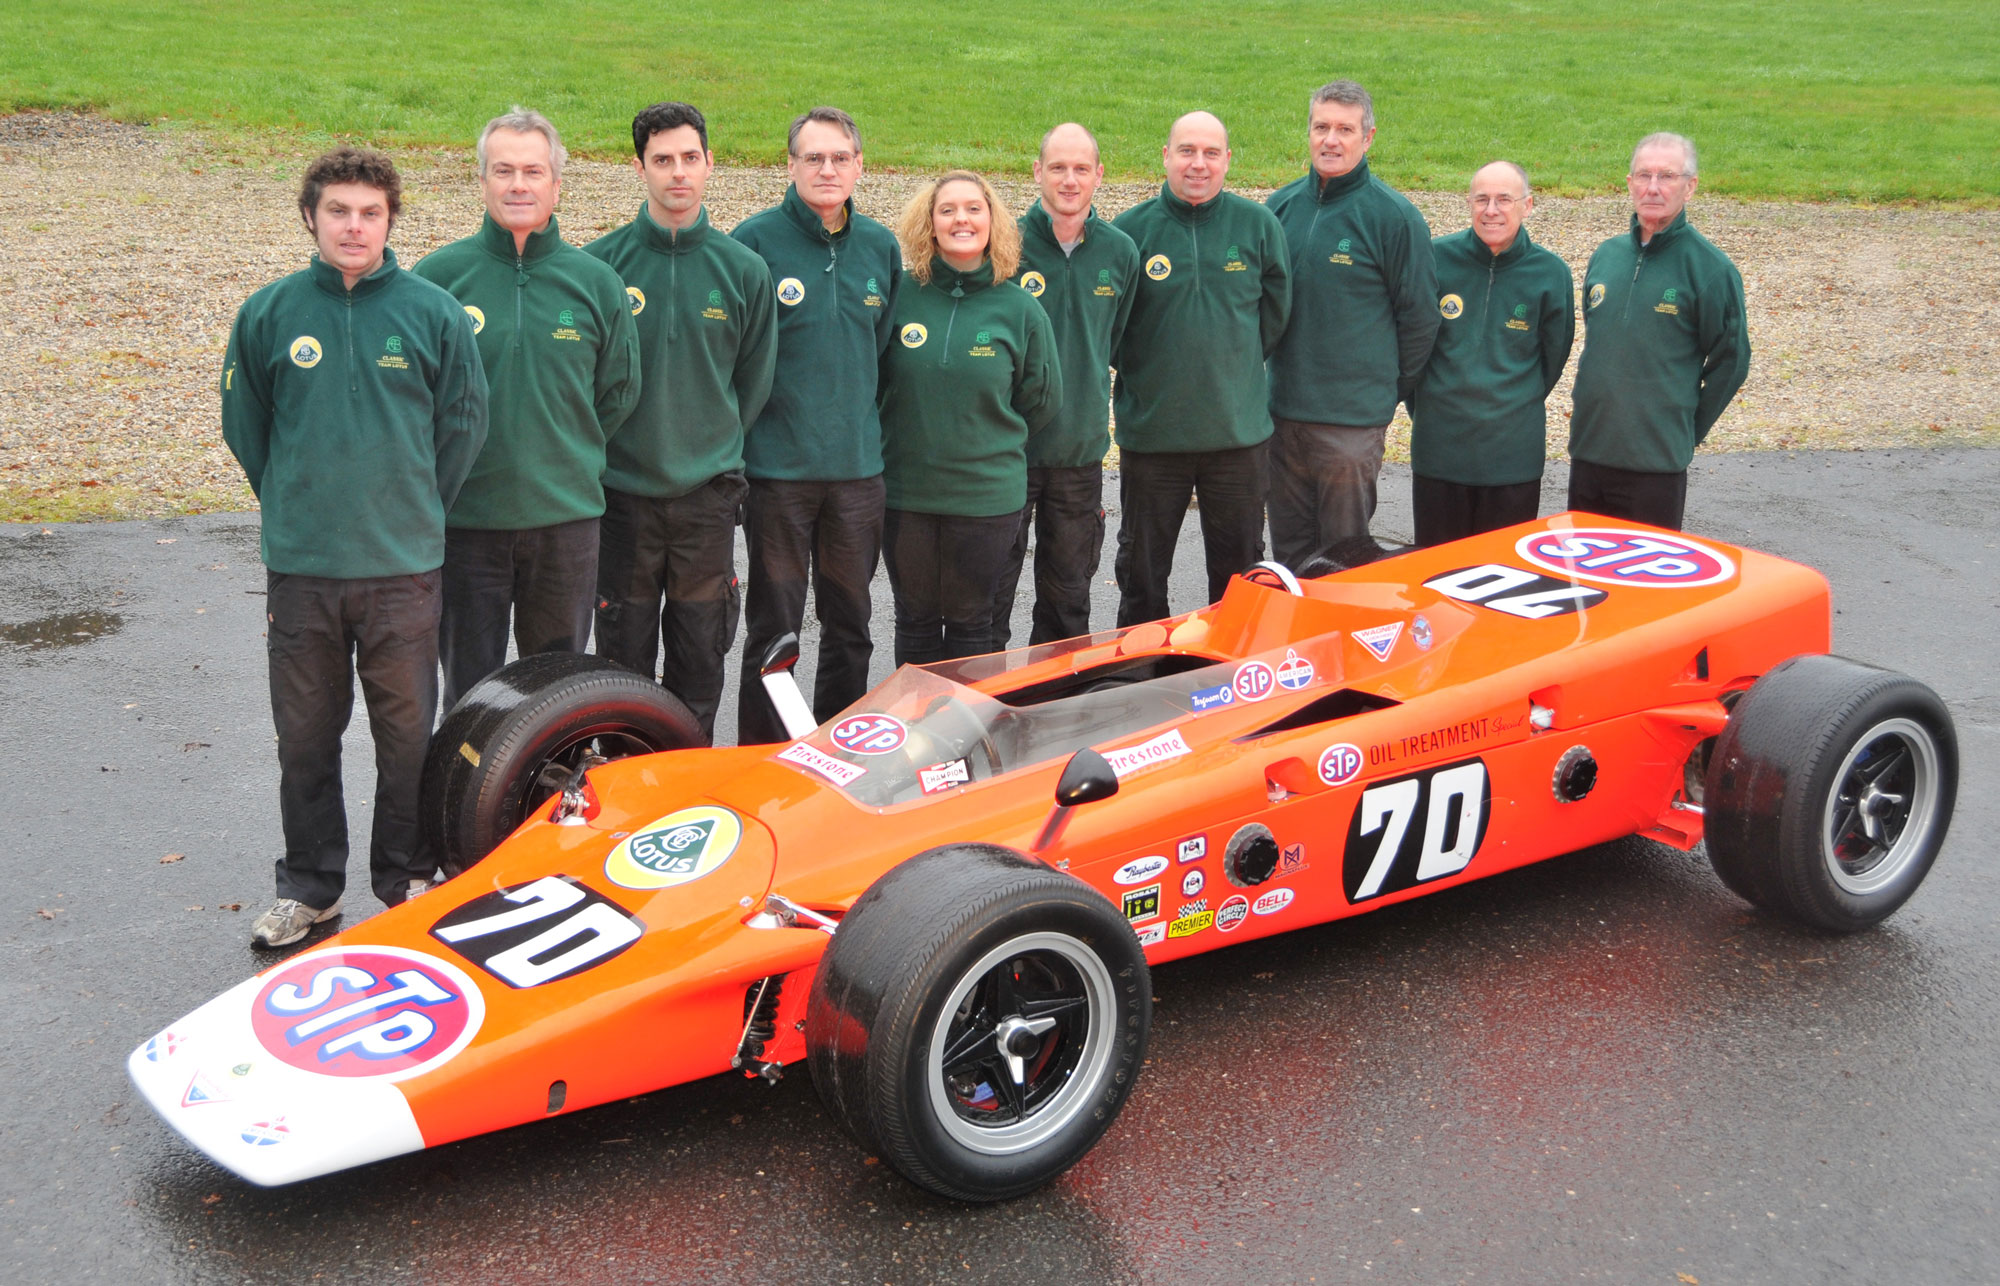 Look what Classic Team Lotus got for Christmas!